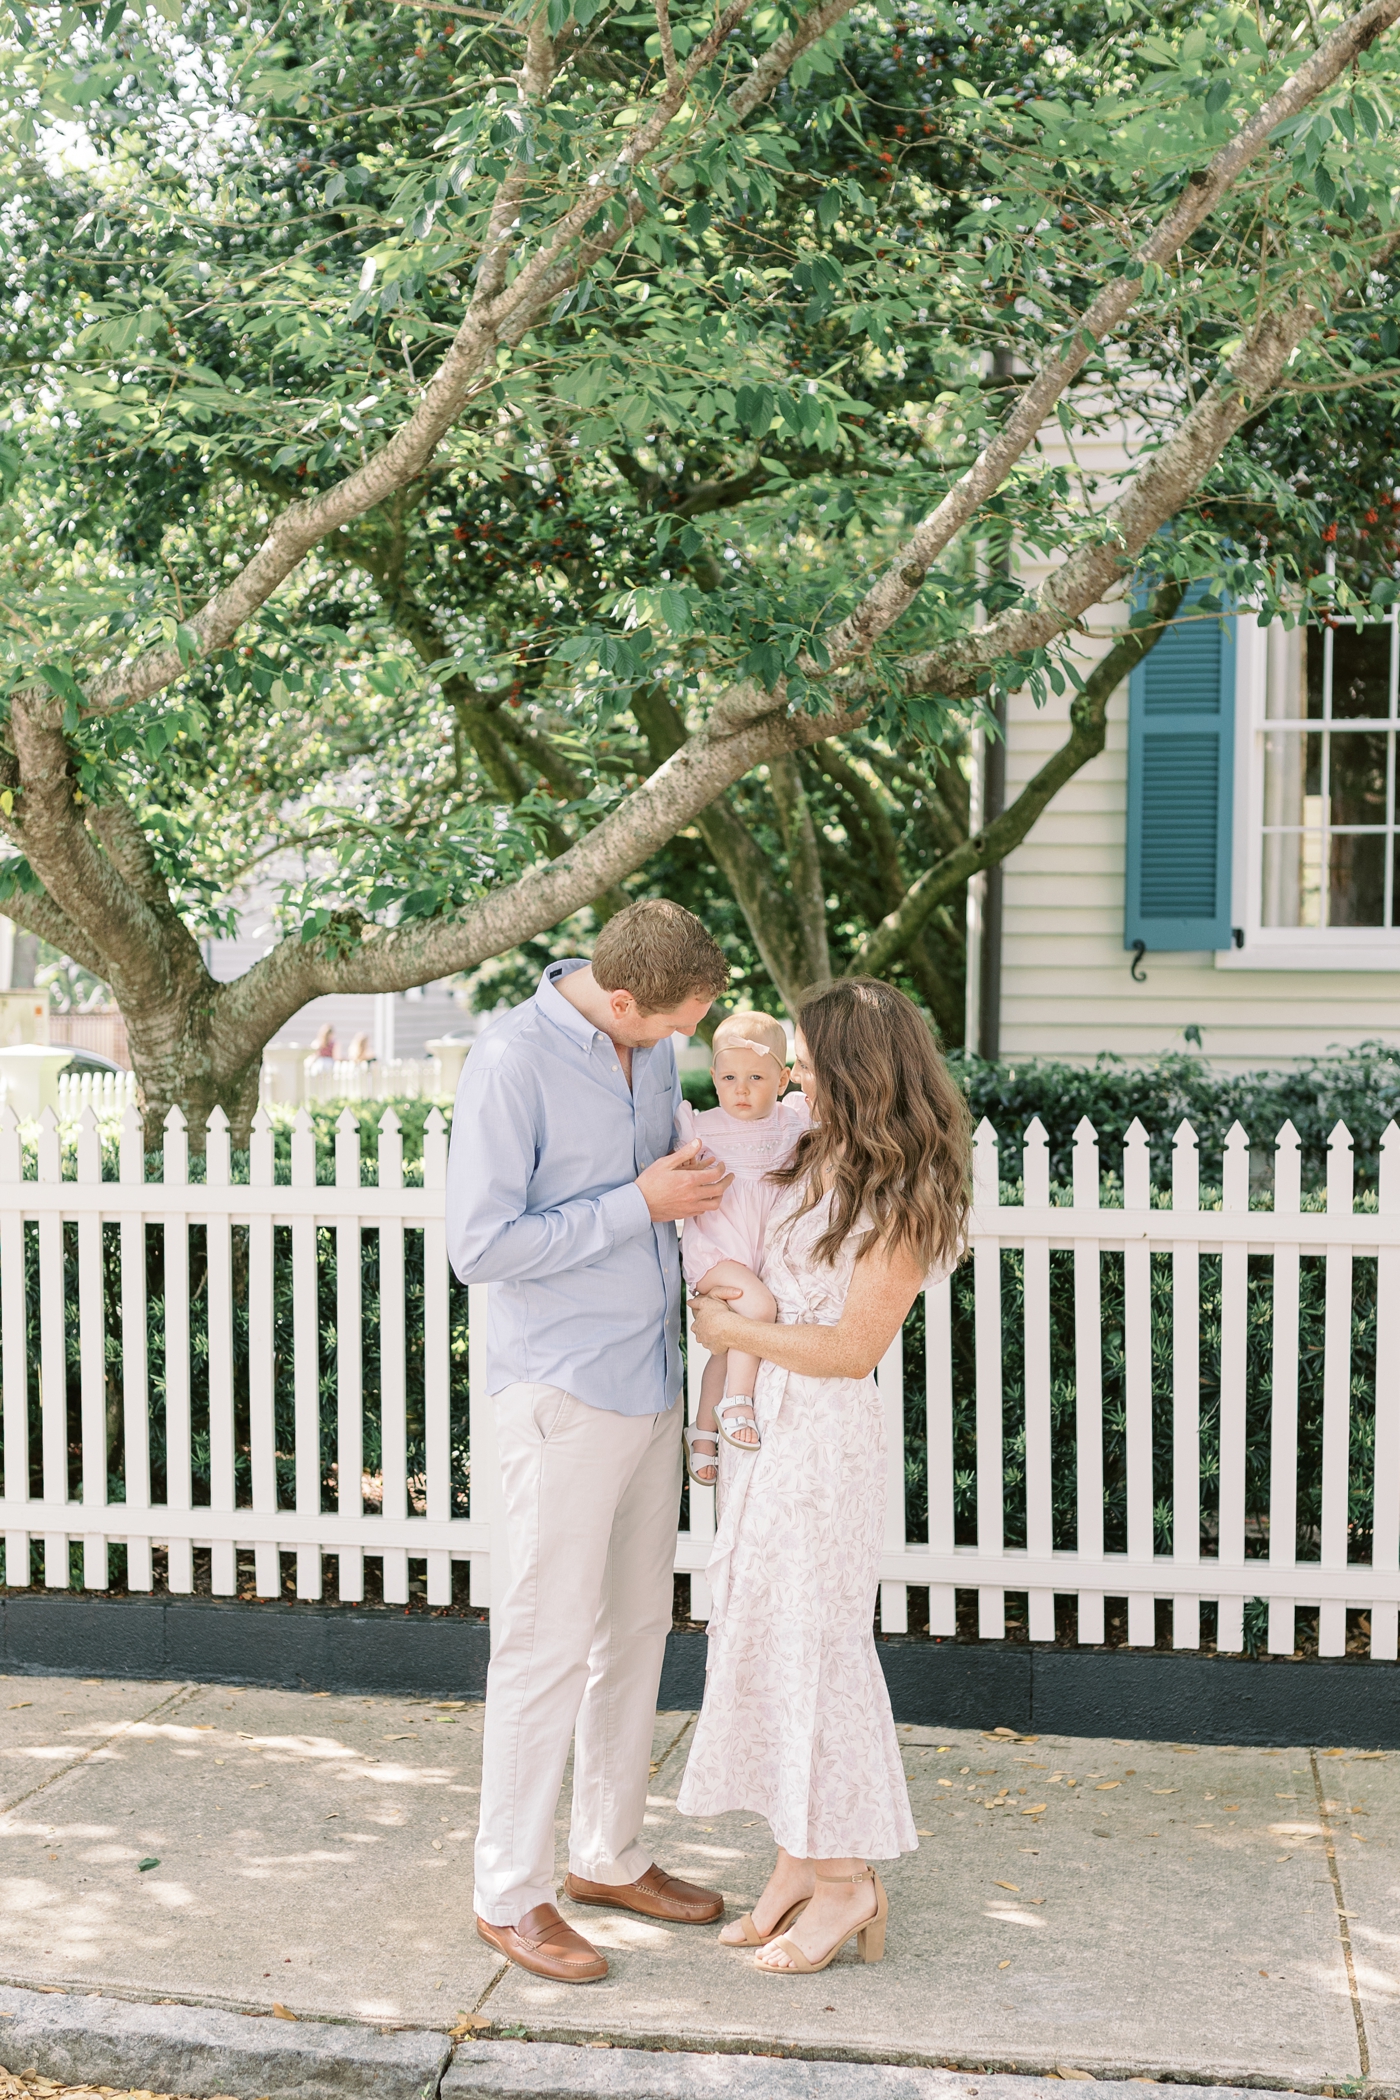 Family walking downtown Charleston with baby girl | Photo by Caitlyn Motycka Photography.